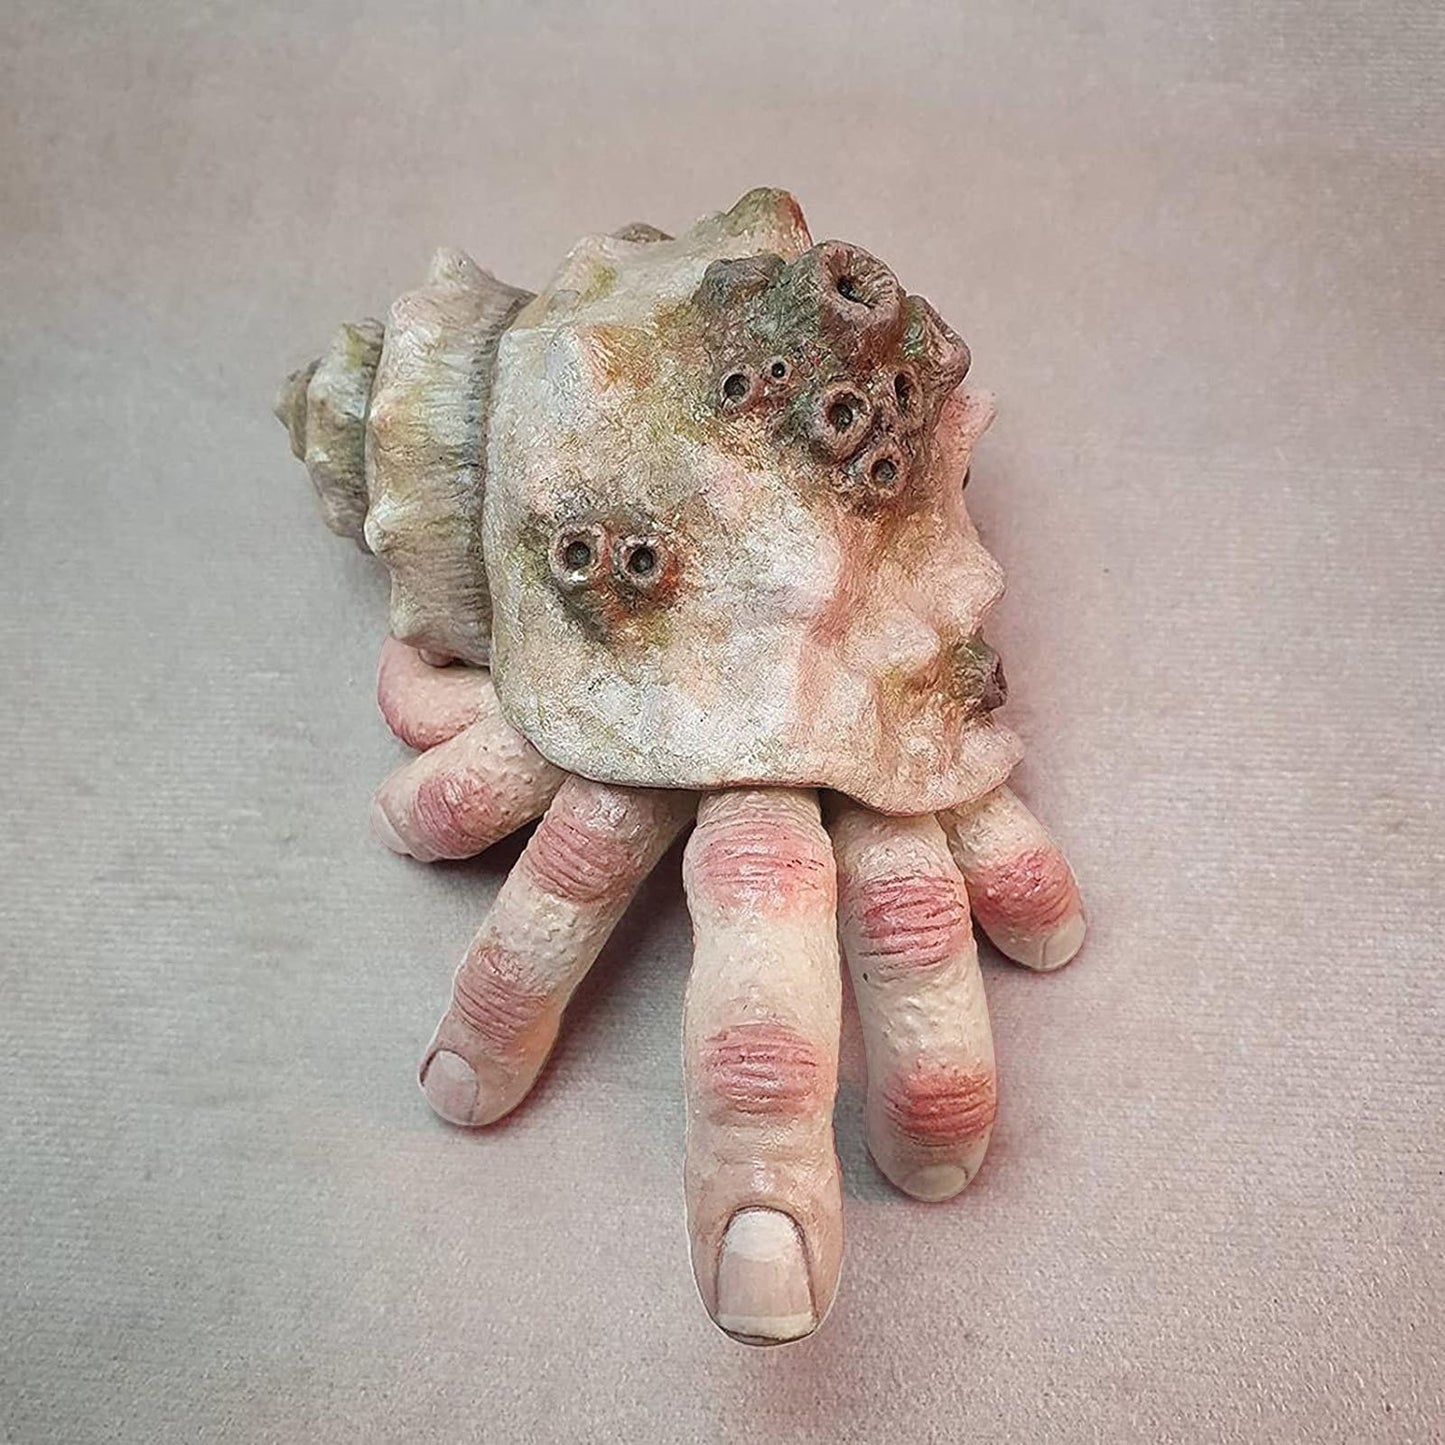 A view from above of a creepy finger crab sculpture which looks like a hermit crab. Human fingers are coming out of the shell instead of a crab. 